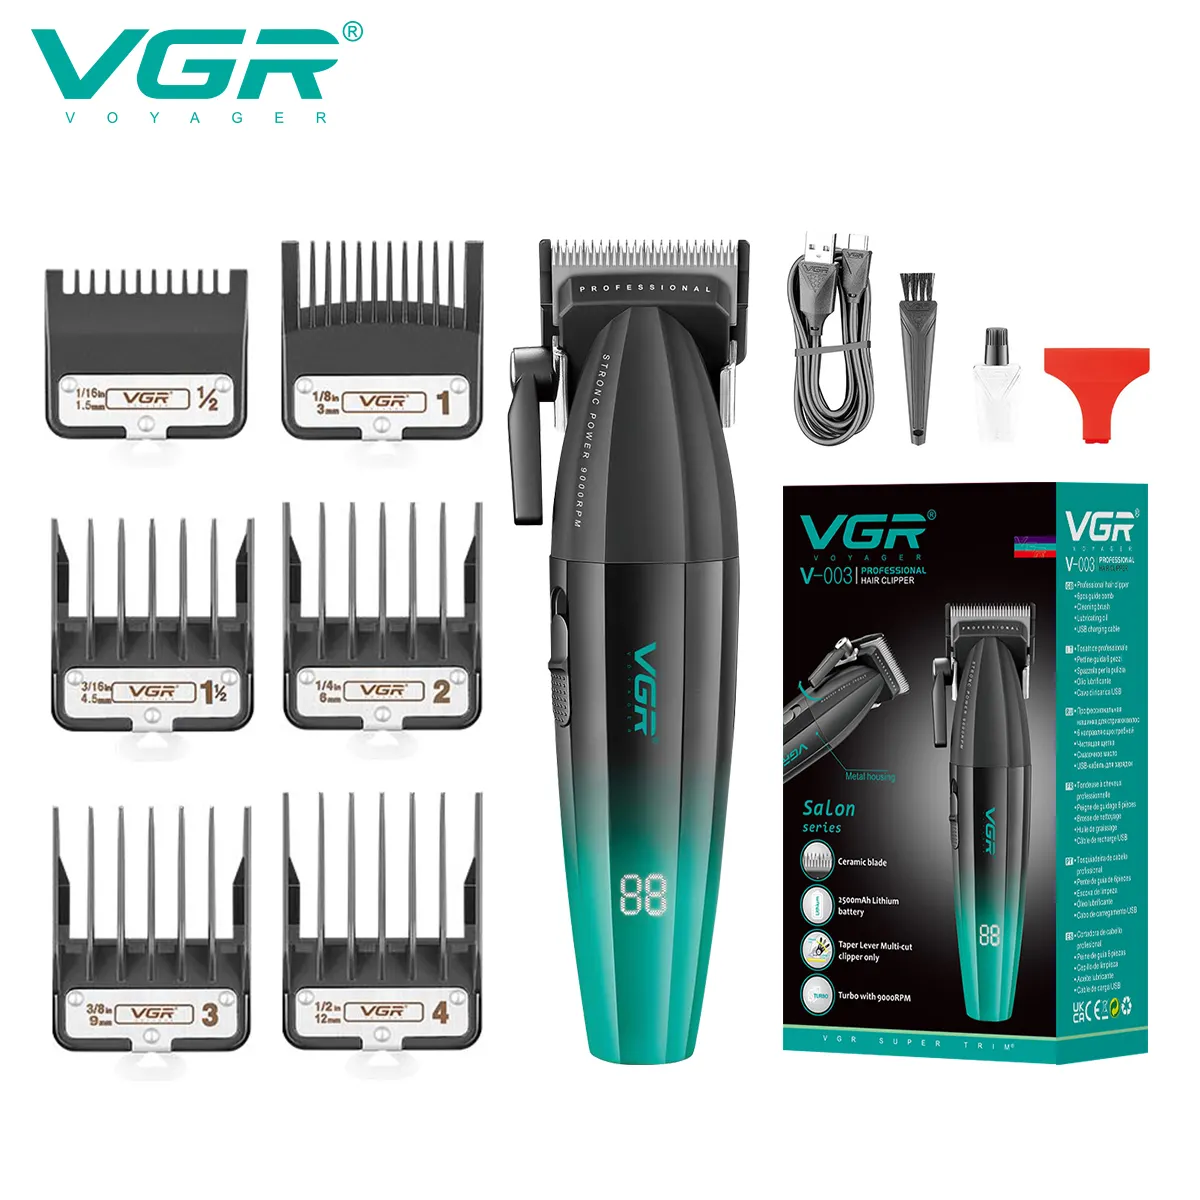 VGR V-003 9000RPM Metal Salon Barber Clippers Rechargeable Professional Hair Clipper for Men